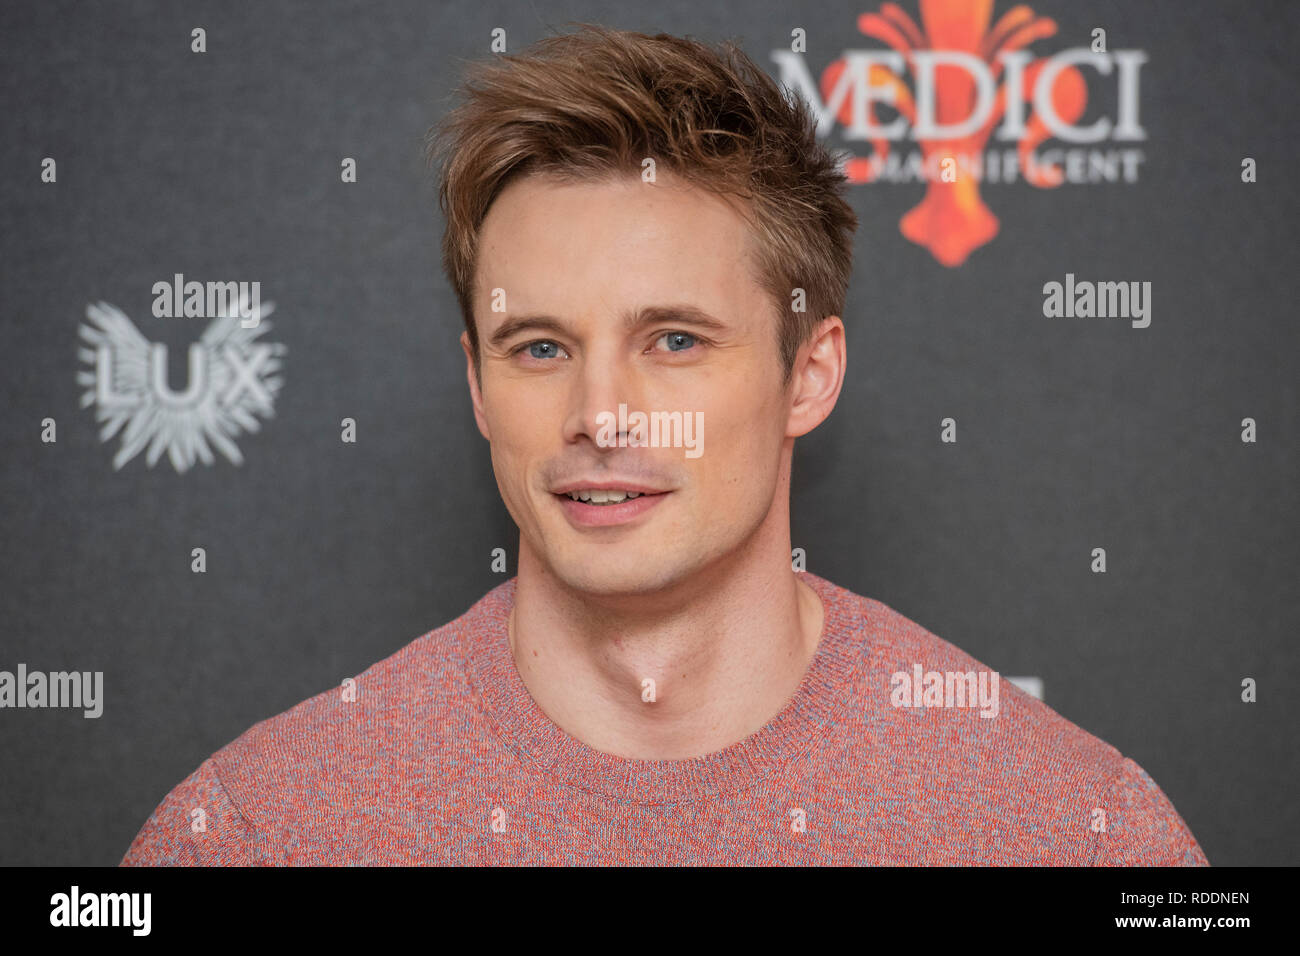 Soho, London, UK. 18th Jan 2019. •	Bradley James - Medici: The Magnificent screening, a new series on Netflix produced by Lux - in the Soho Hotel. Credit: Guy Bell/Alamy Live News Stock Photo